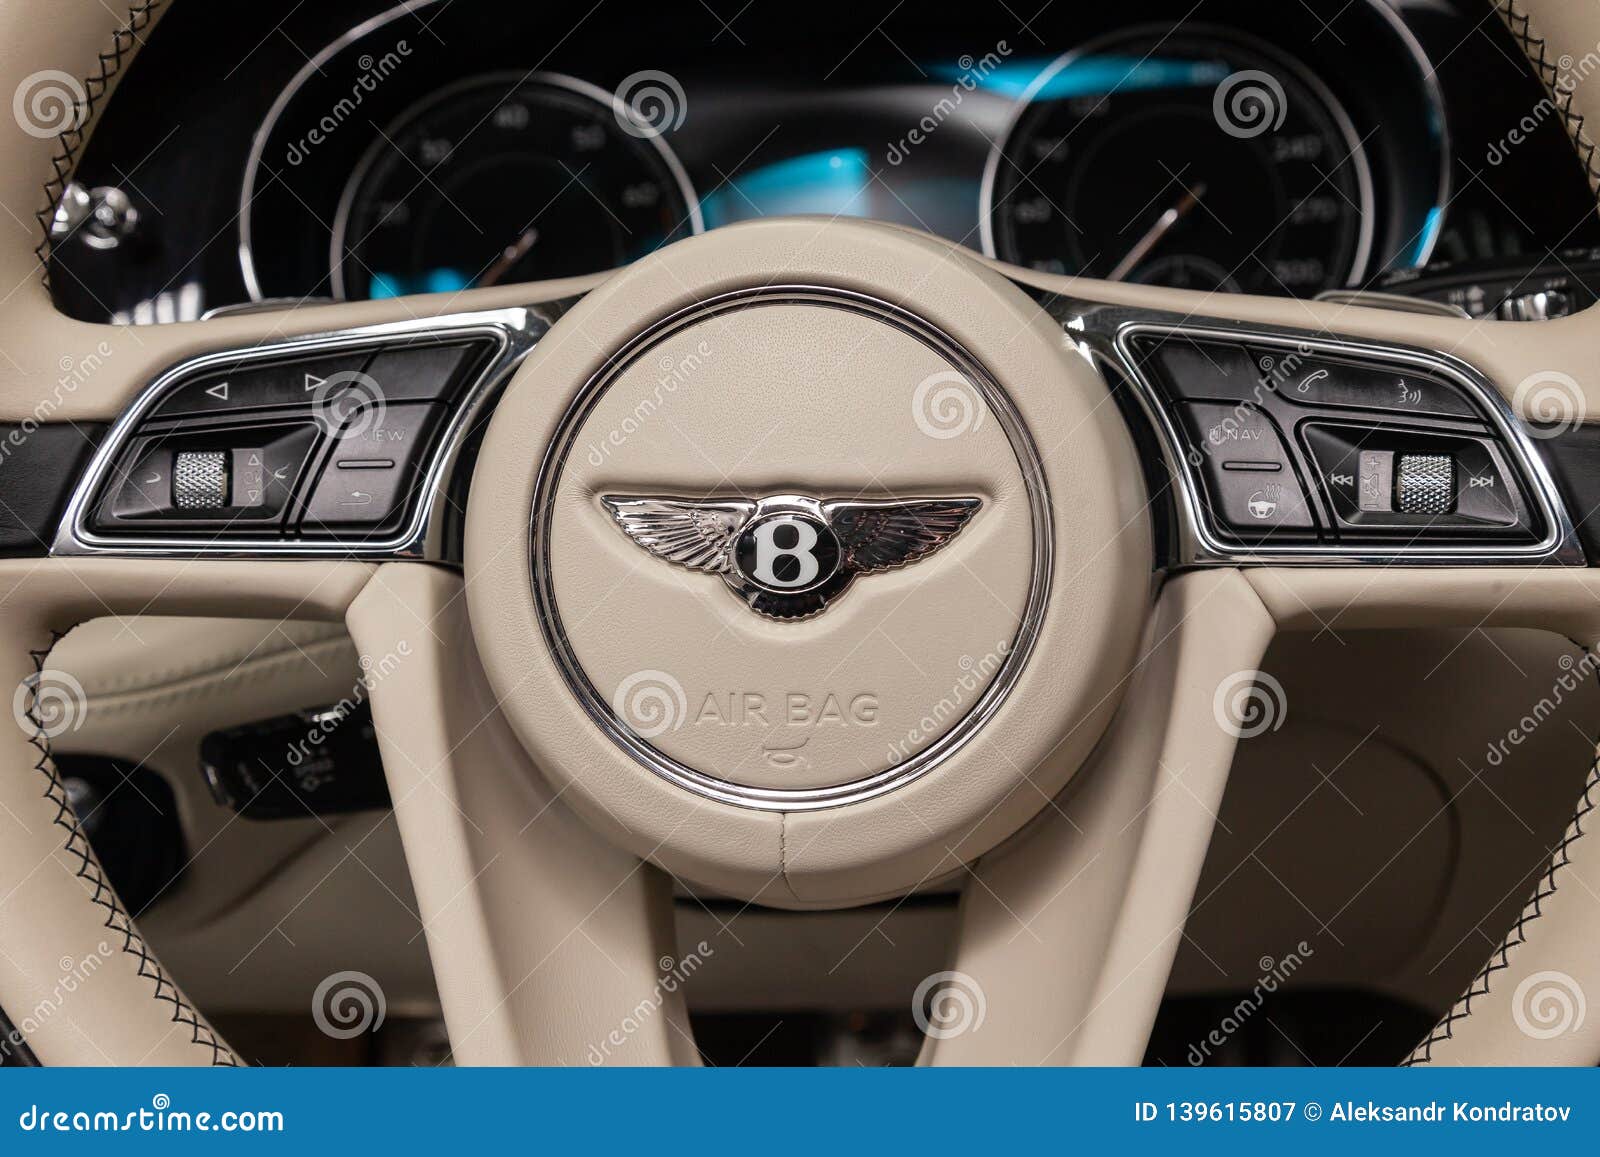 Interior View With Emblem On Steering Wheel Of Luxury Very